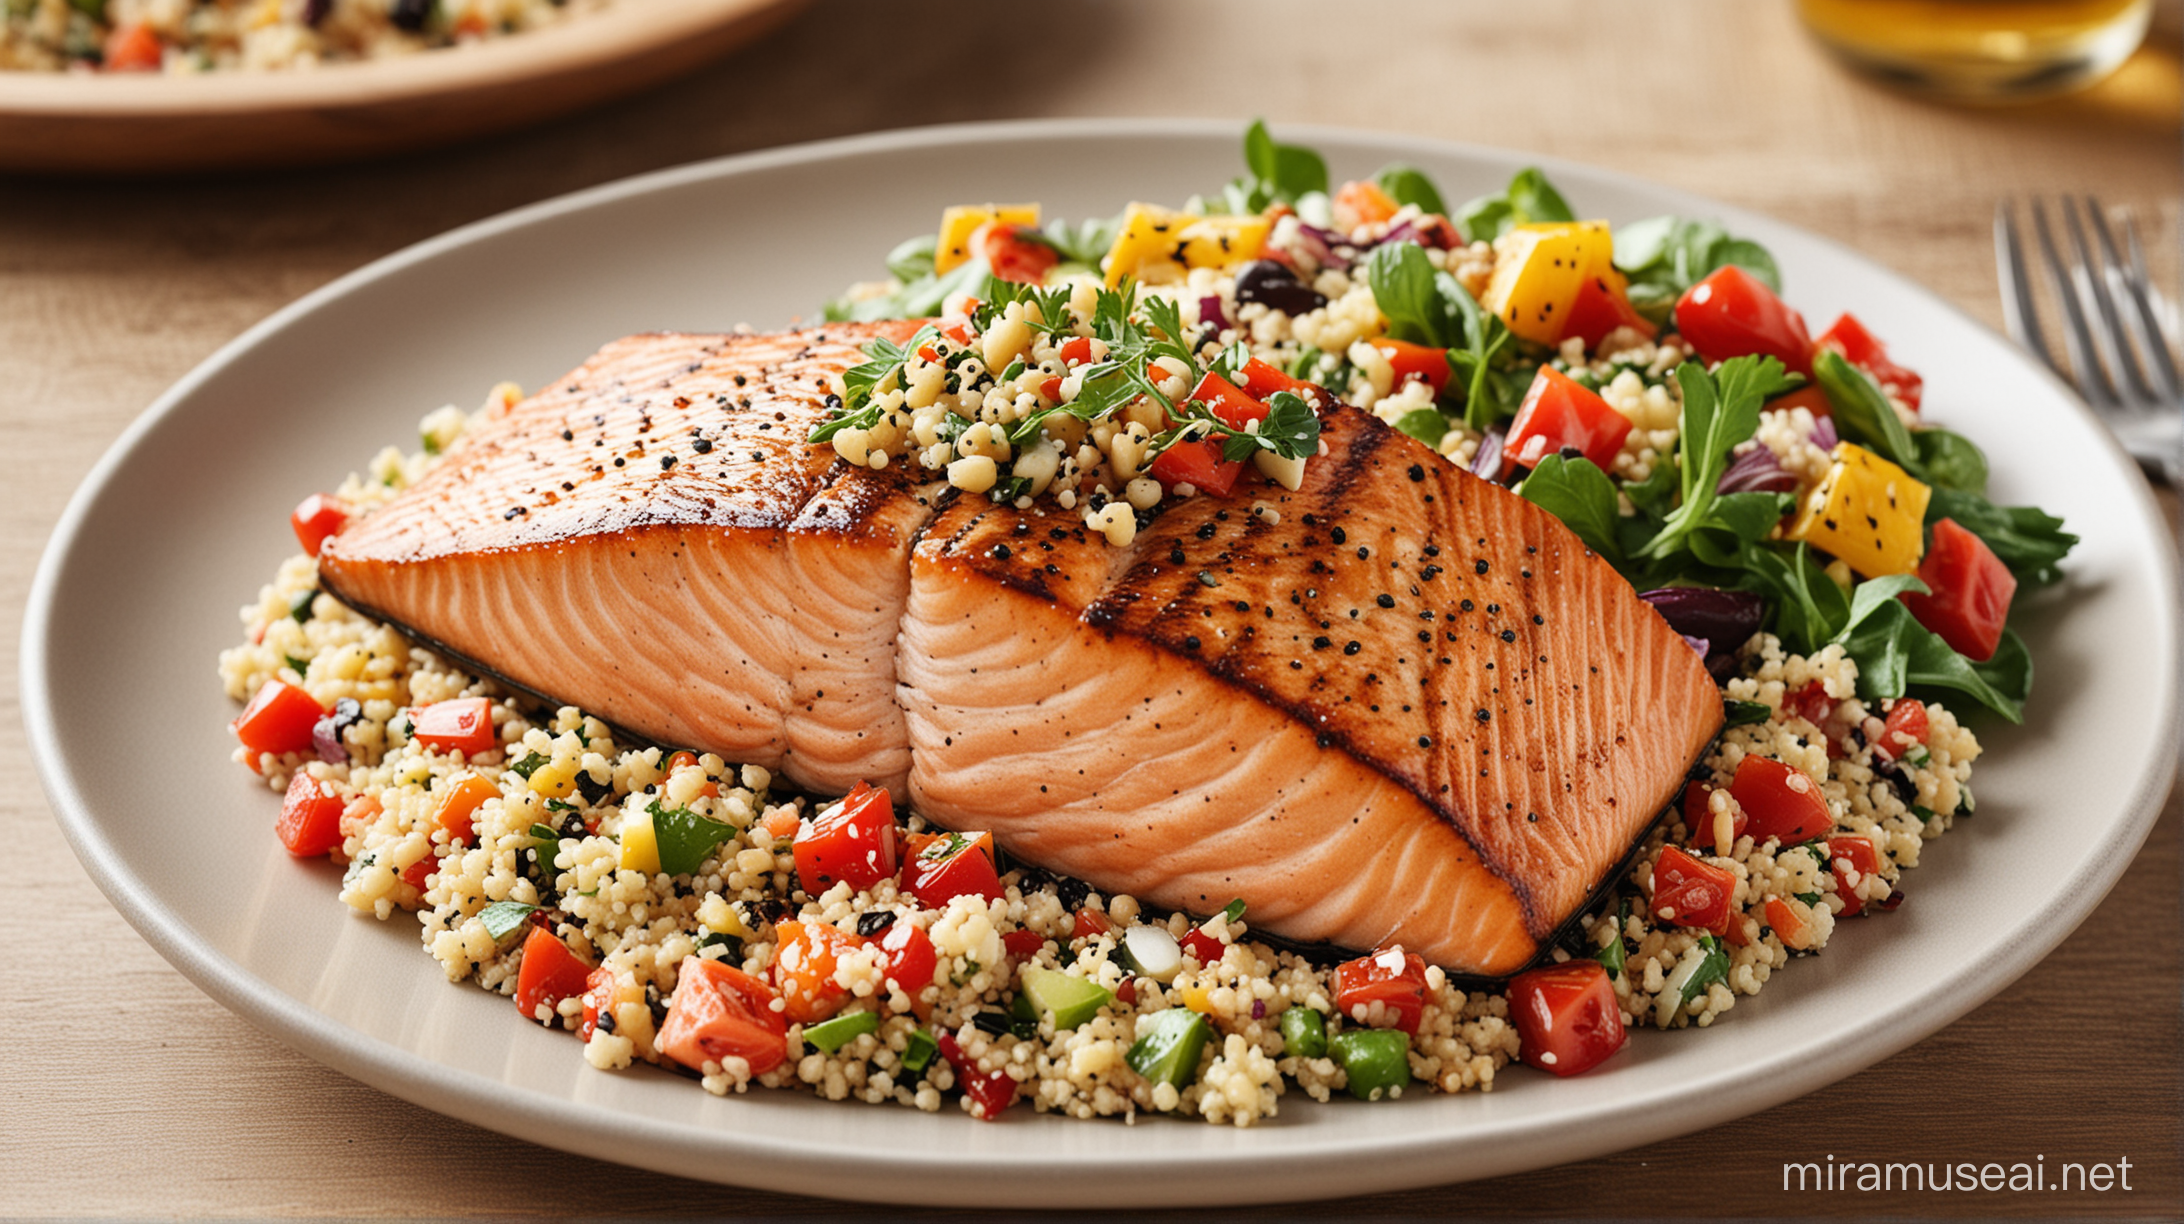 Grilled Salmon with Quinoa Salad Healthy Gourmet Dish on White Plate